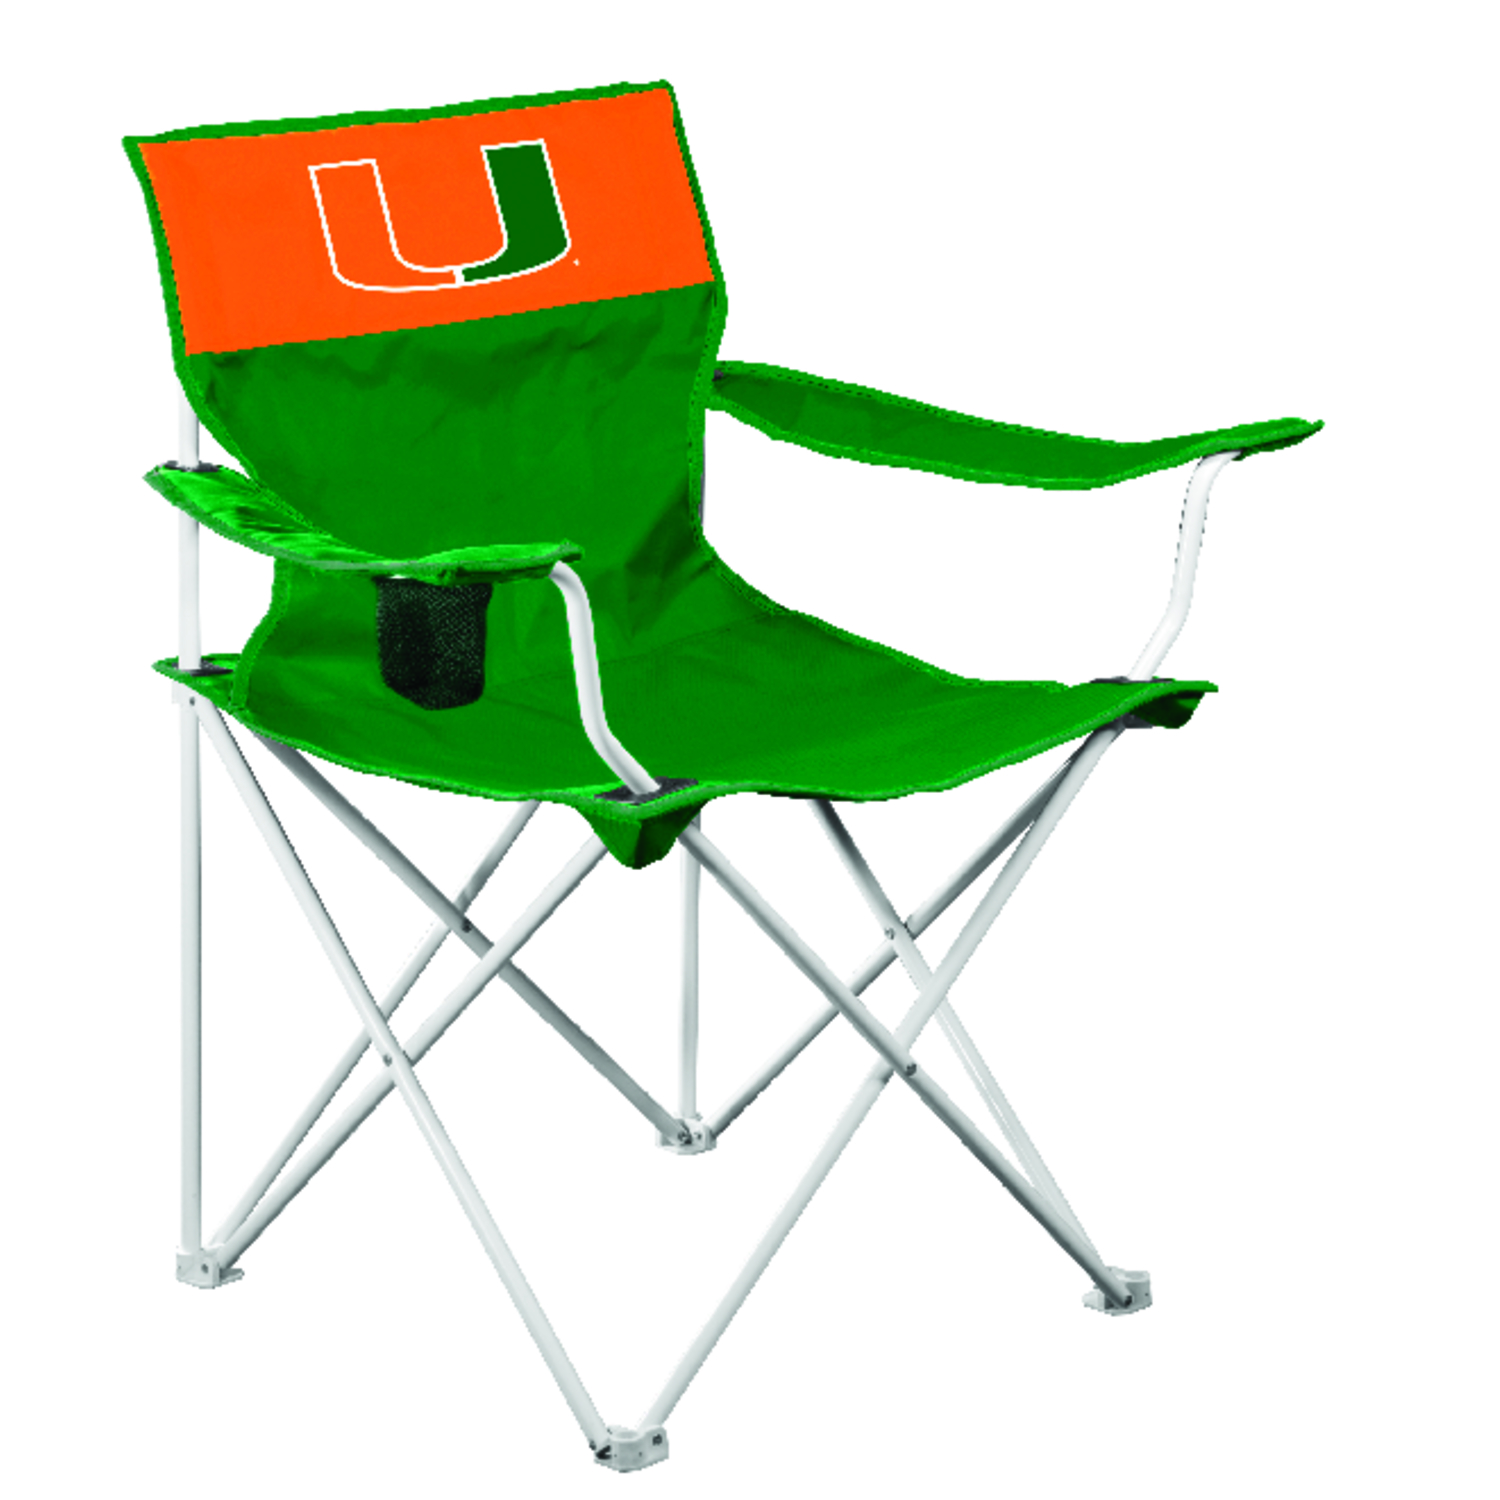 outdoor sporting event chairs